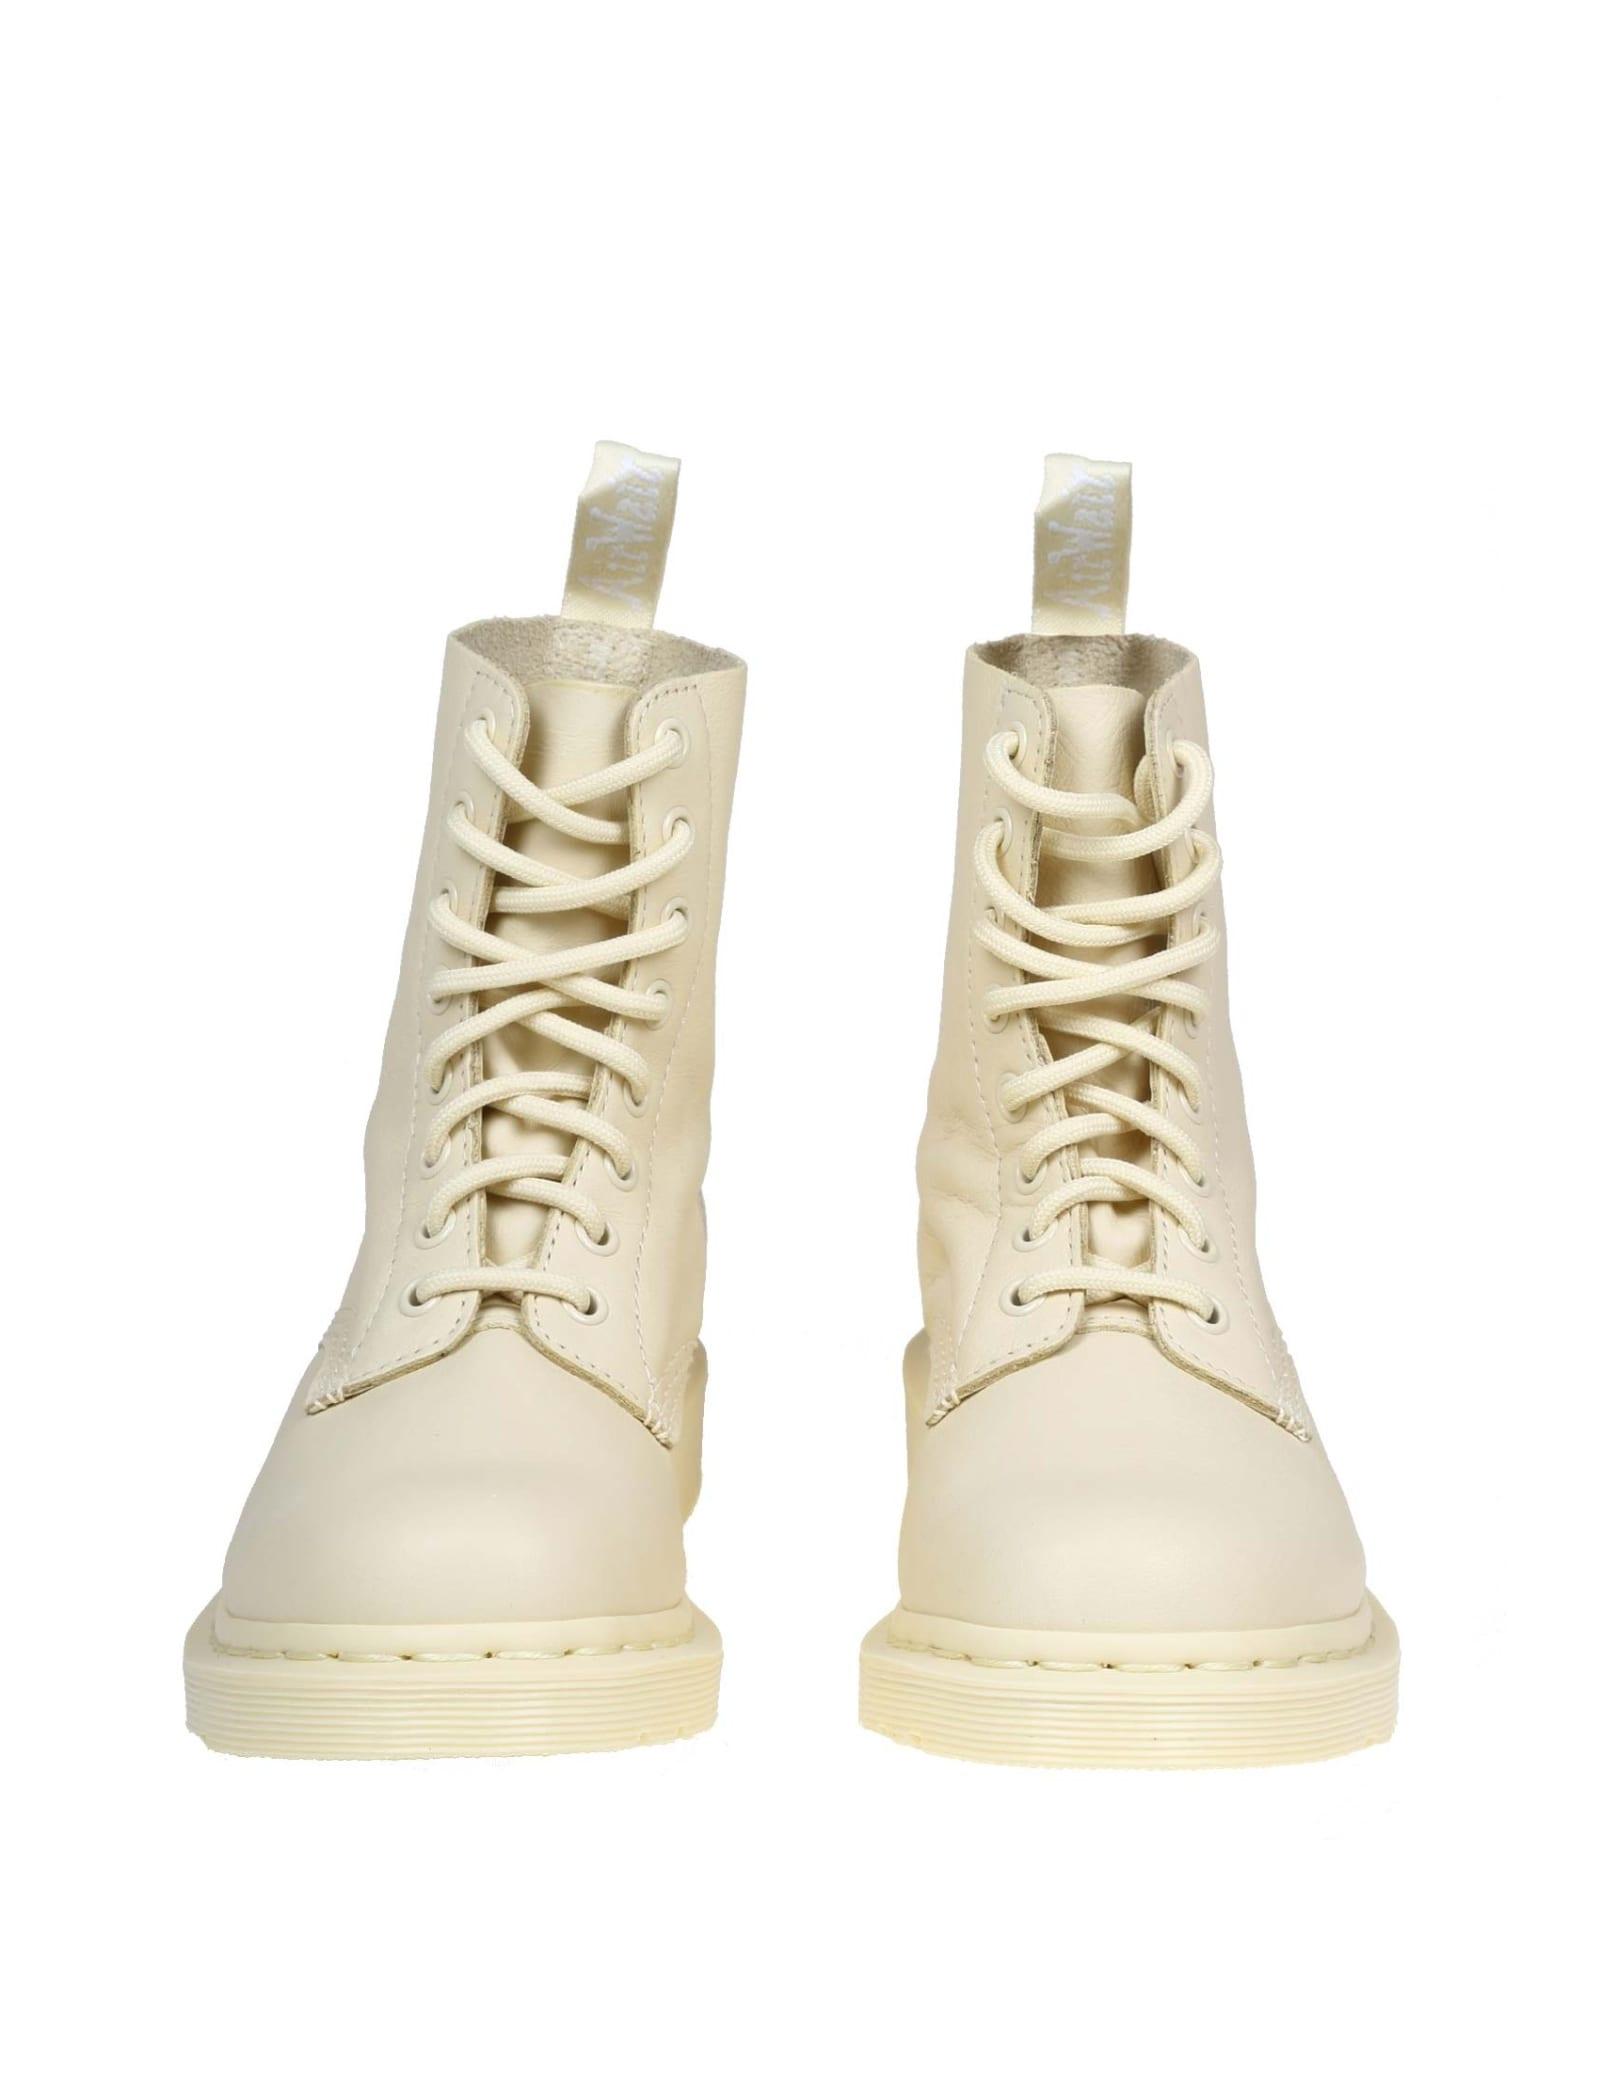 Dr. Martens 1460 Pascal Mono In Leather in Natural | Lyst